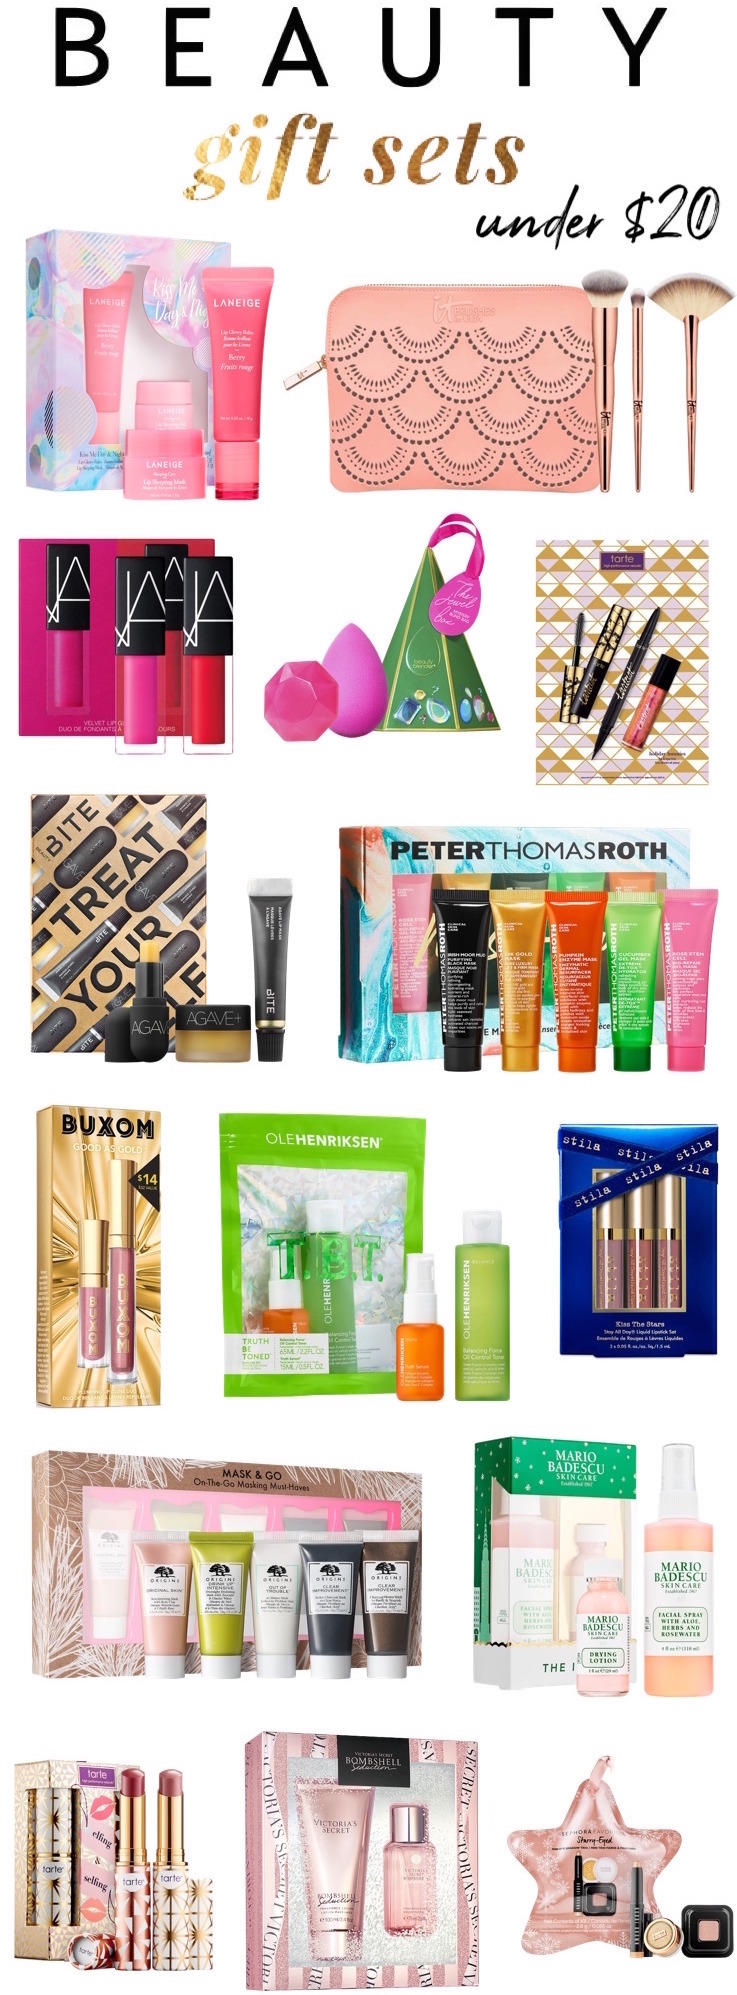 Best Beauty Gift Sets (Under $20) Holiday 2019 #holidaygiftideas #beautygifts #makeupgifts #giftsforher #holidaygifts #beautygiftsets #holiday2019 #holidaygift 